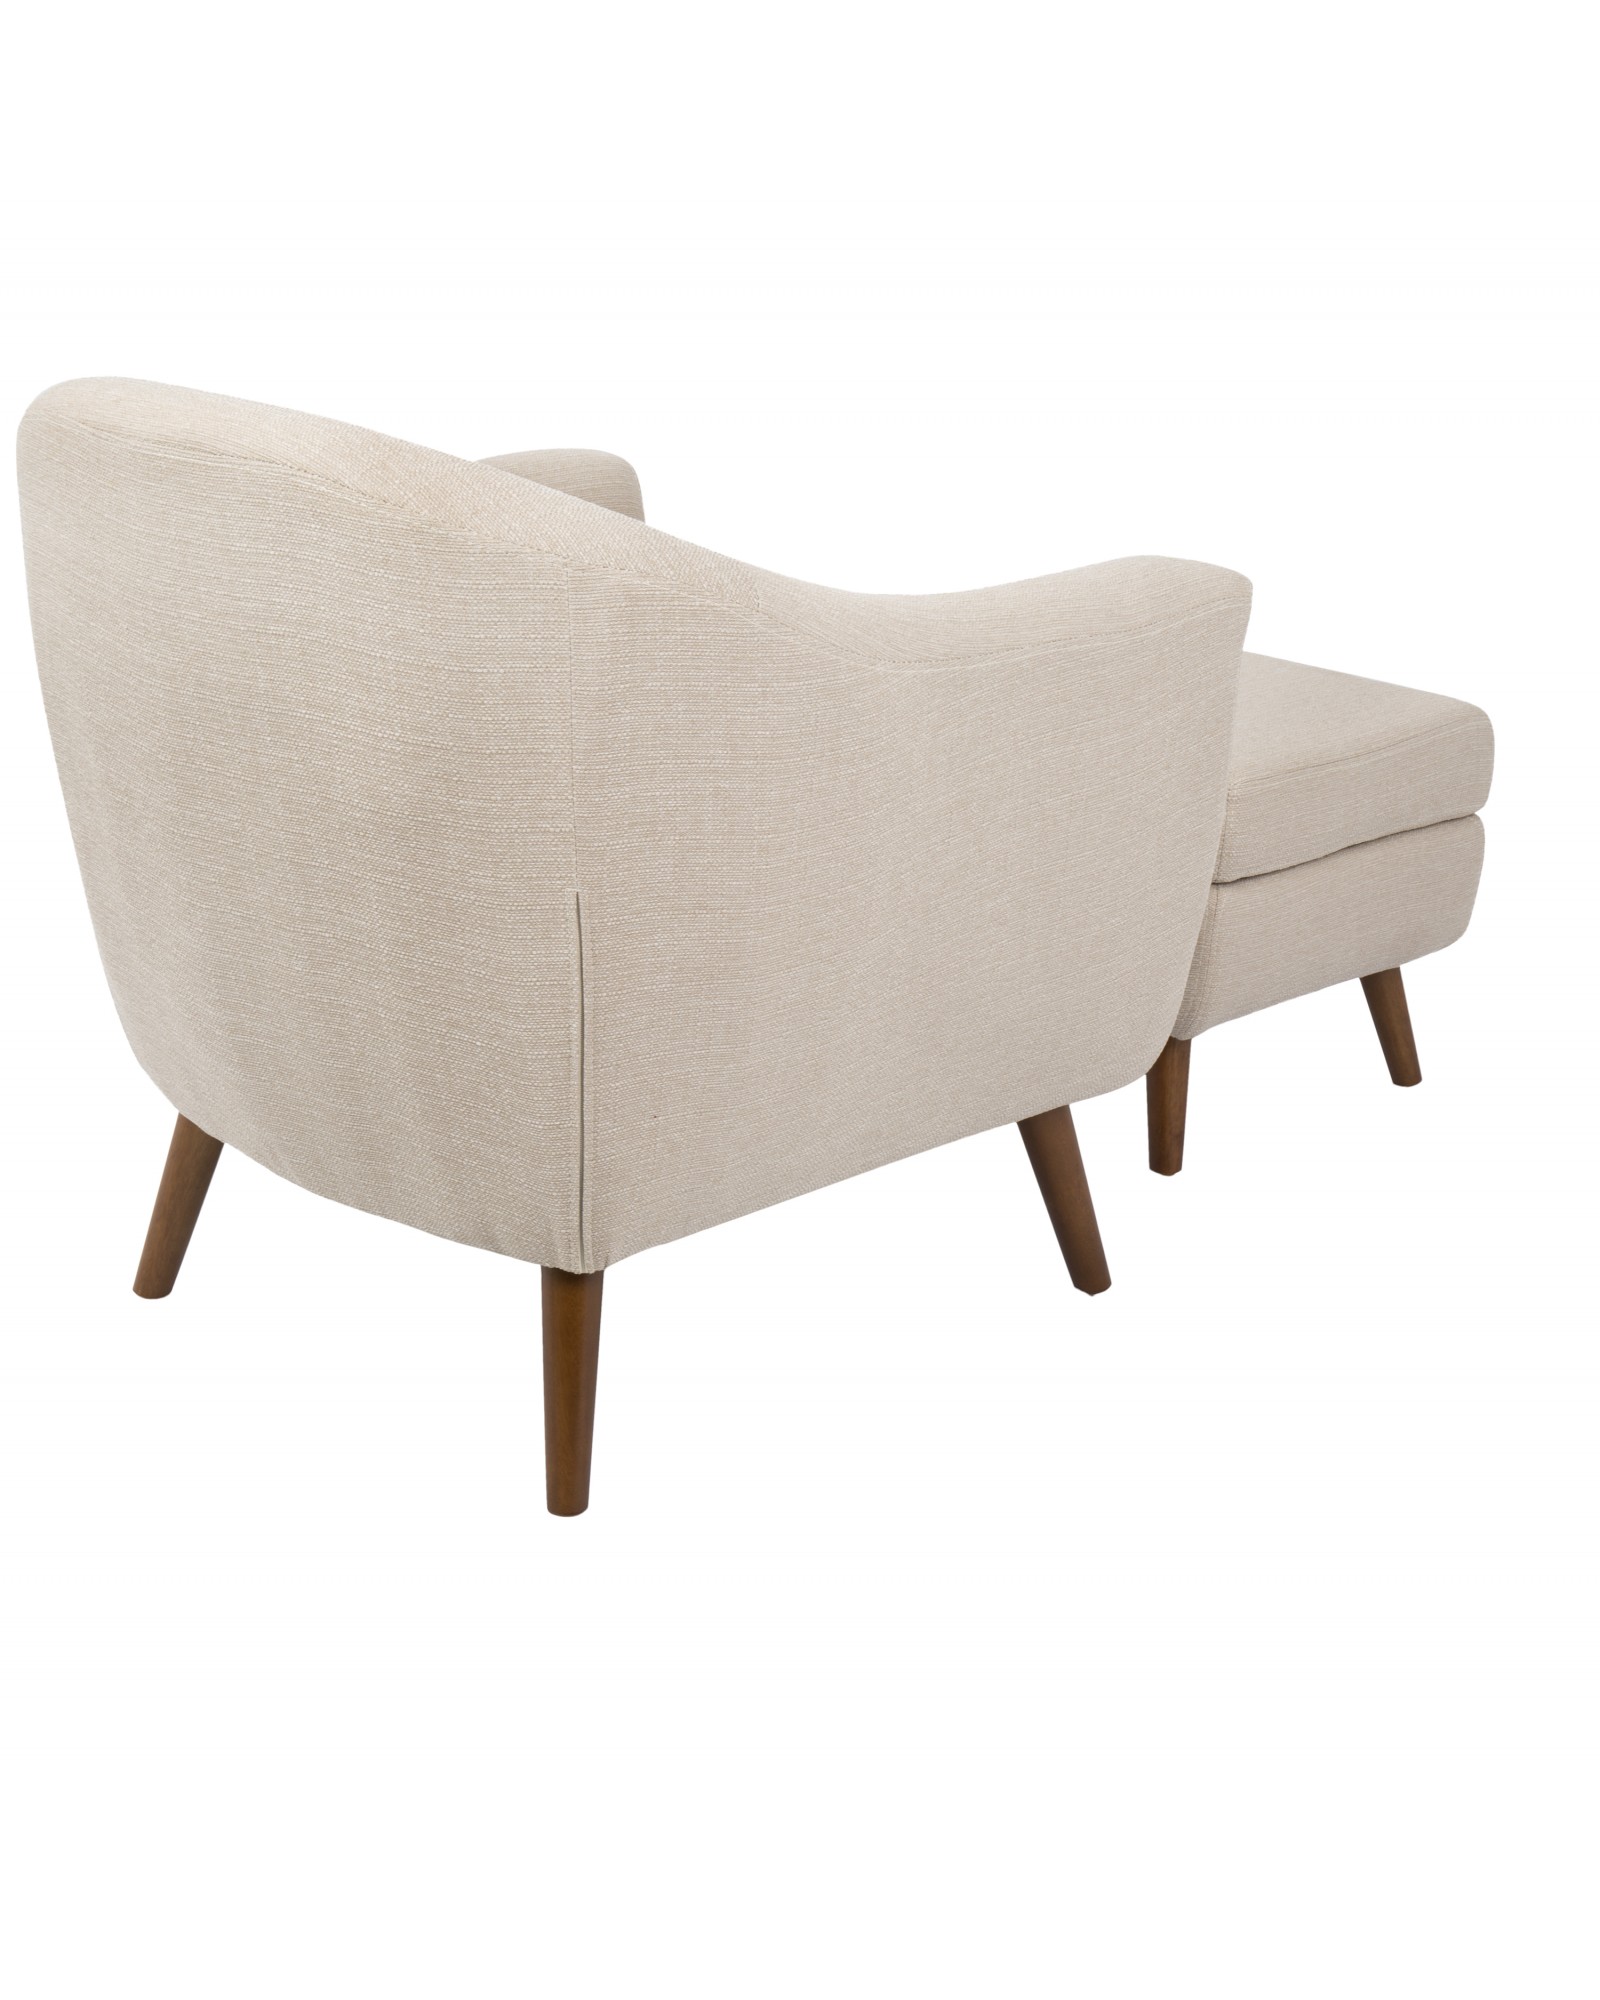 Rockwell Mid-Century Modern Accent Chair and Ottoman in Beige